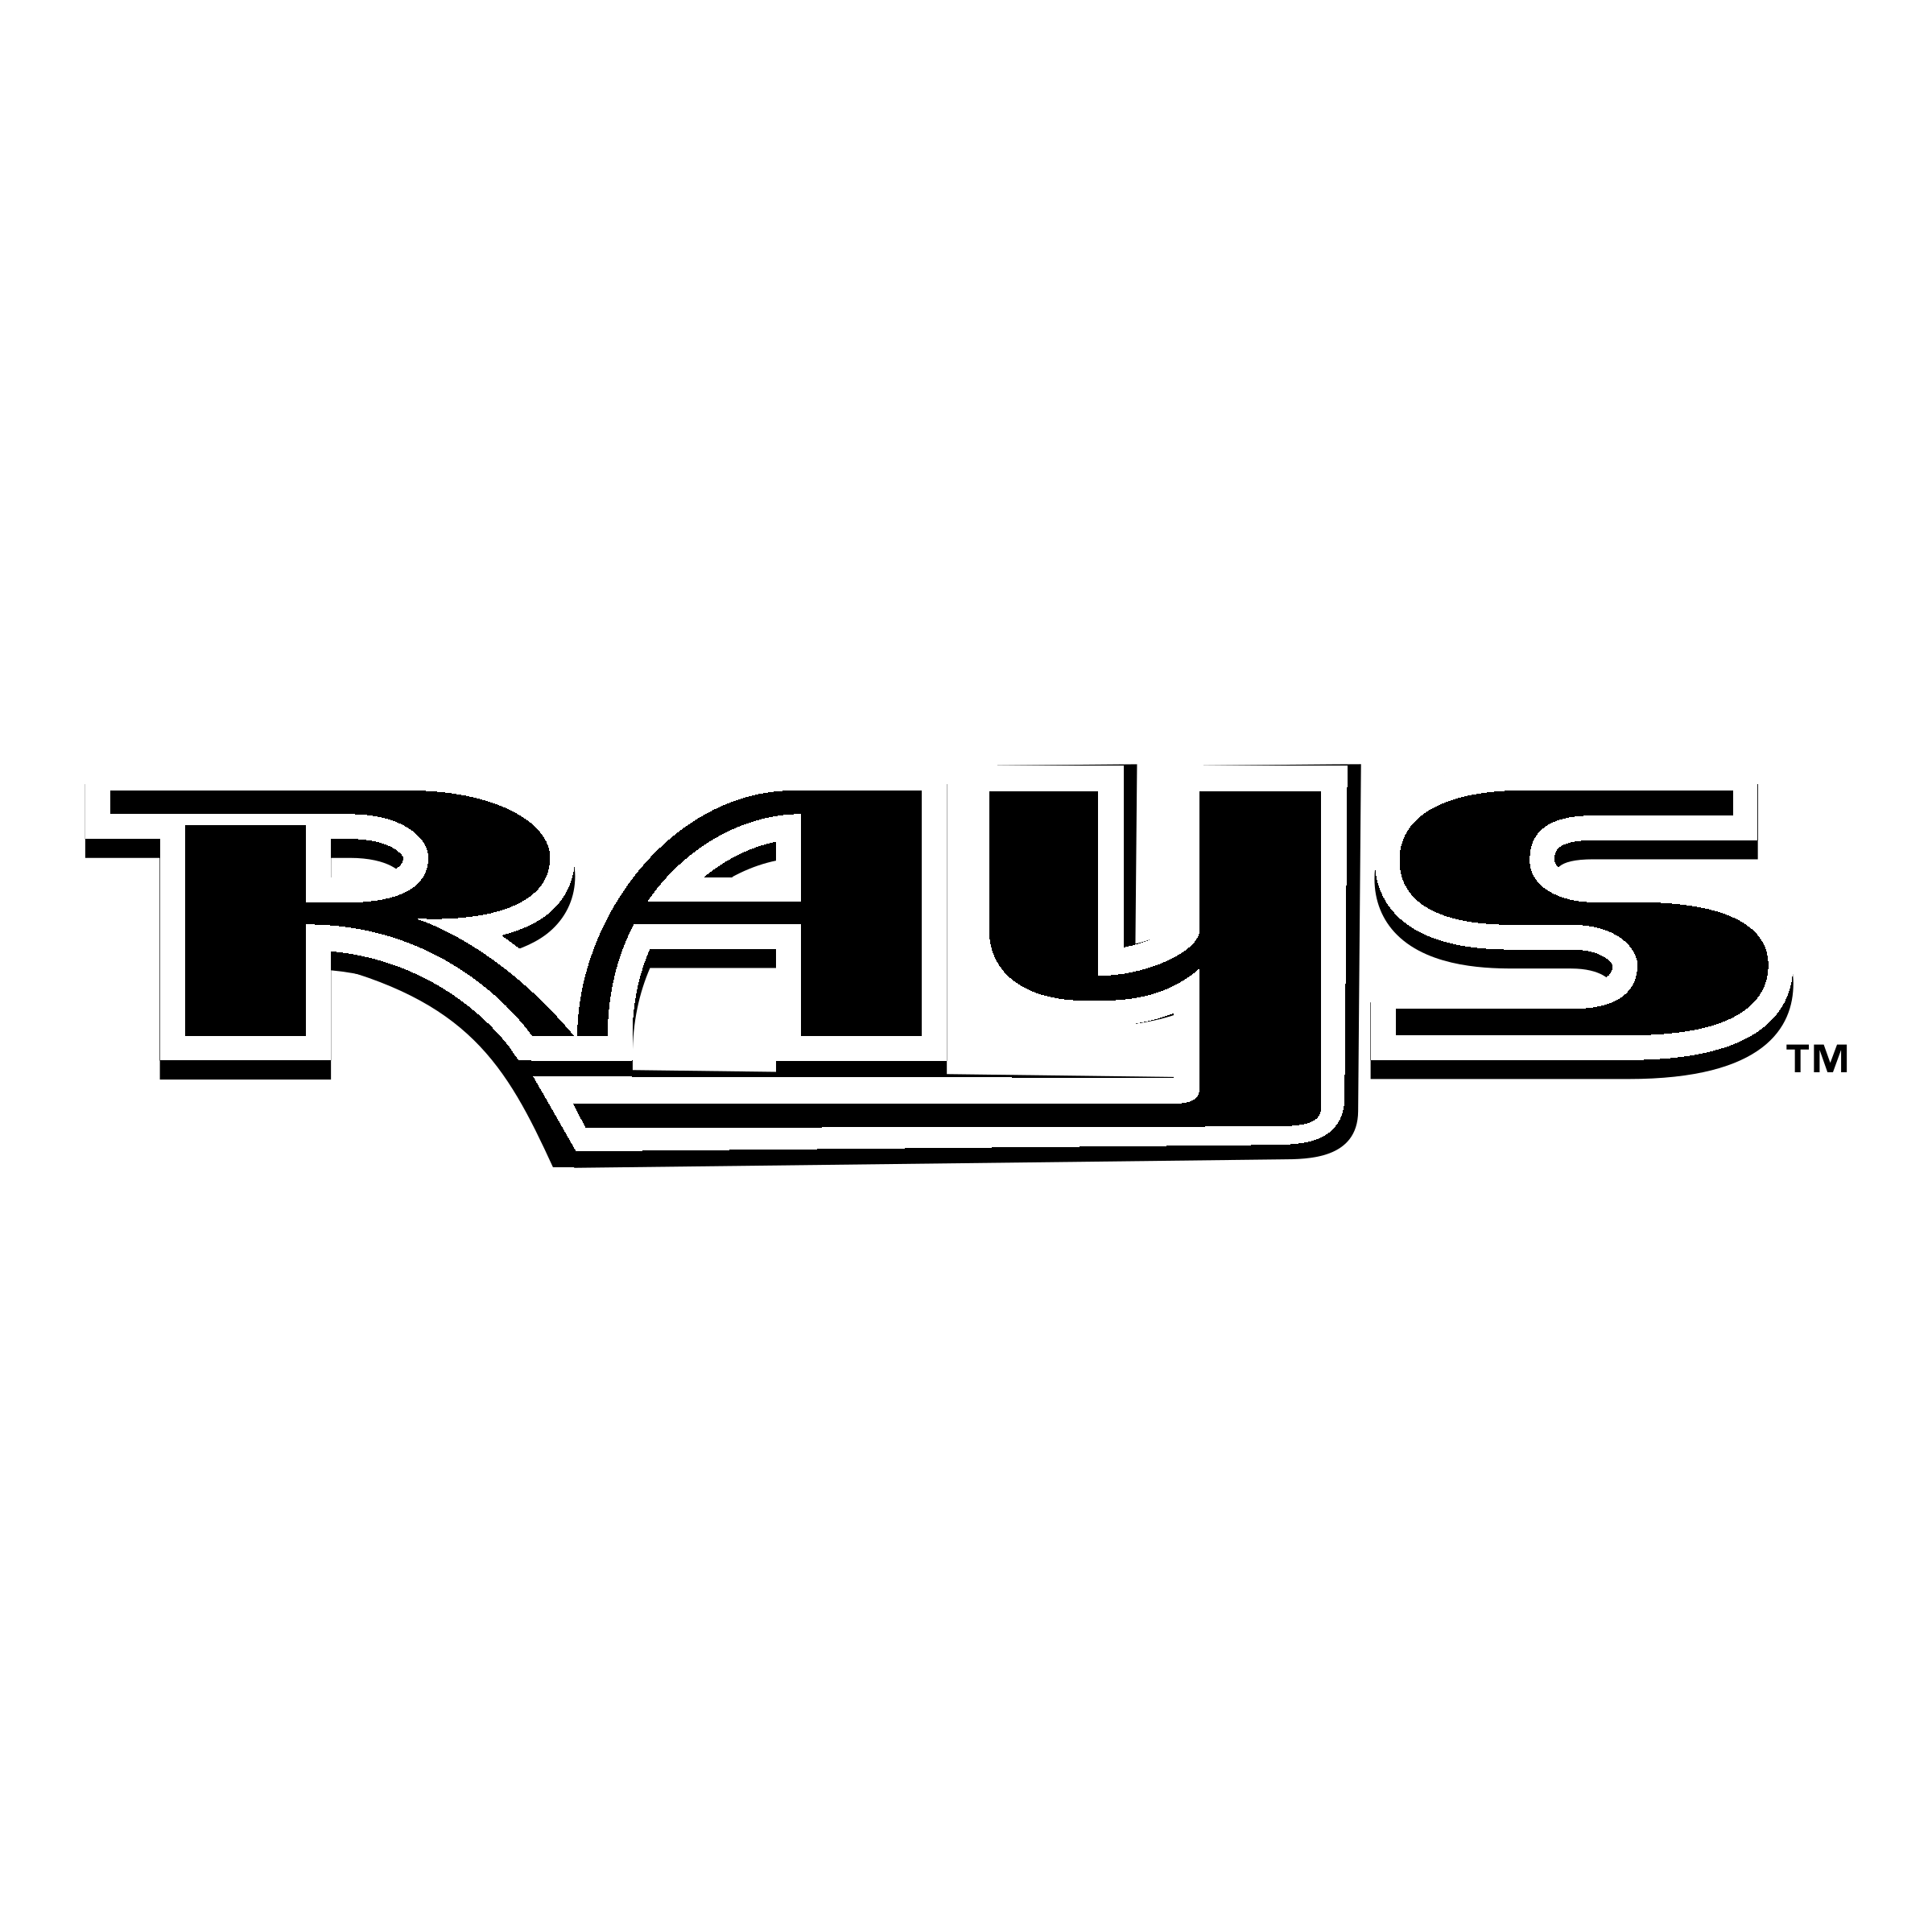 Tampa Bay Rays Background PNG Image